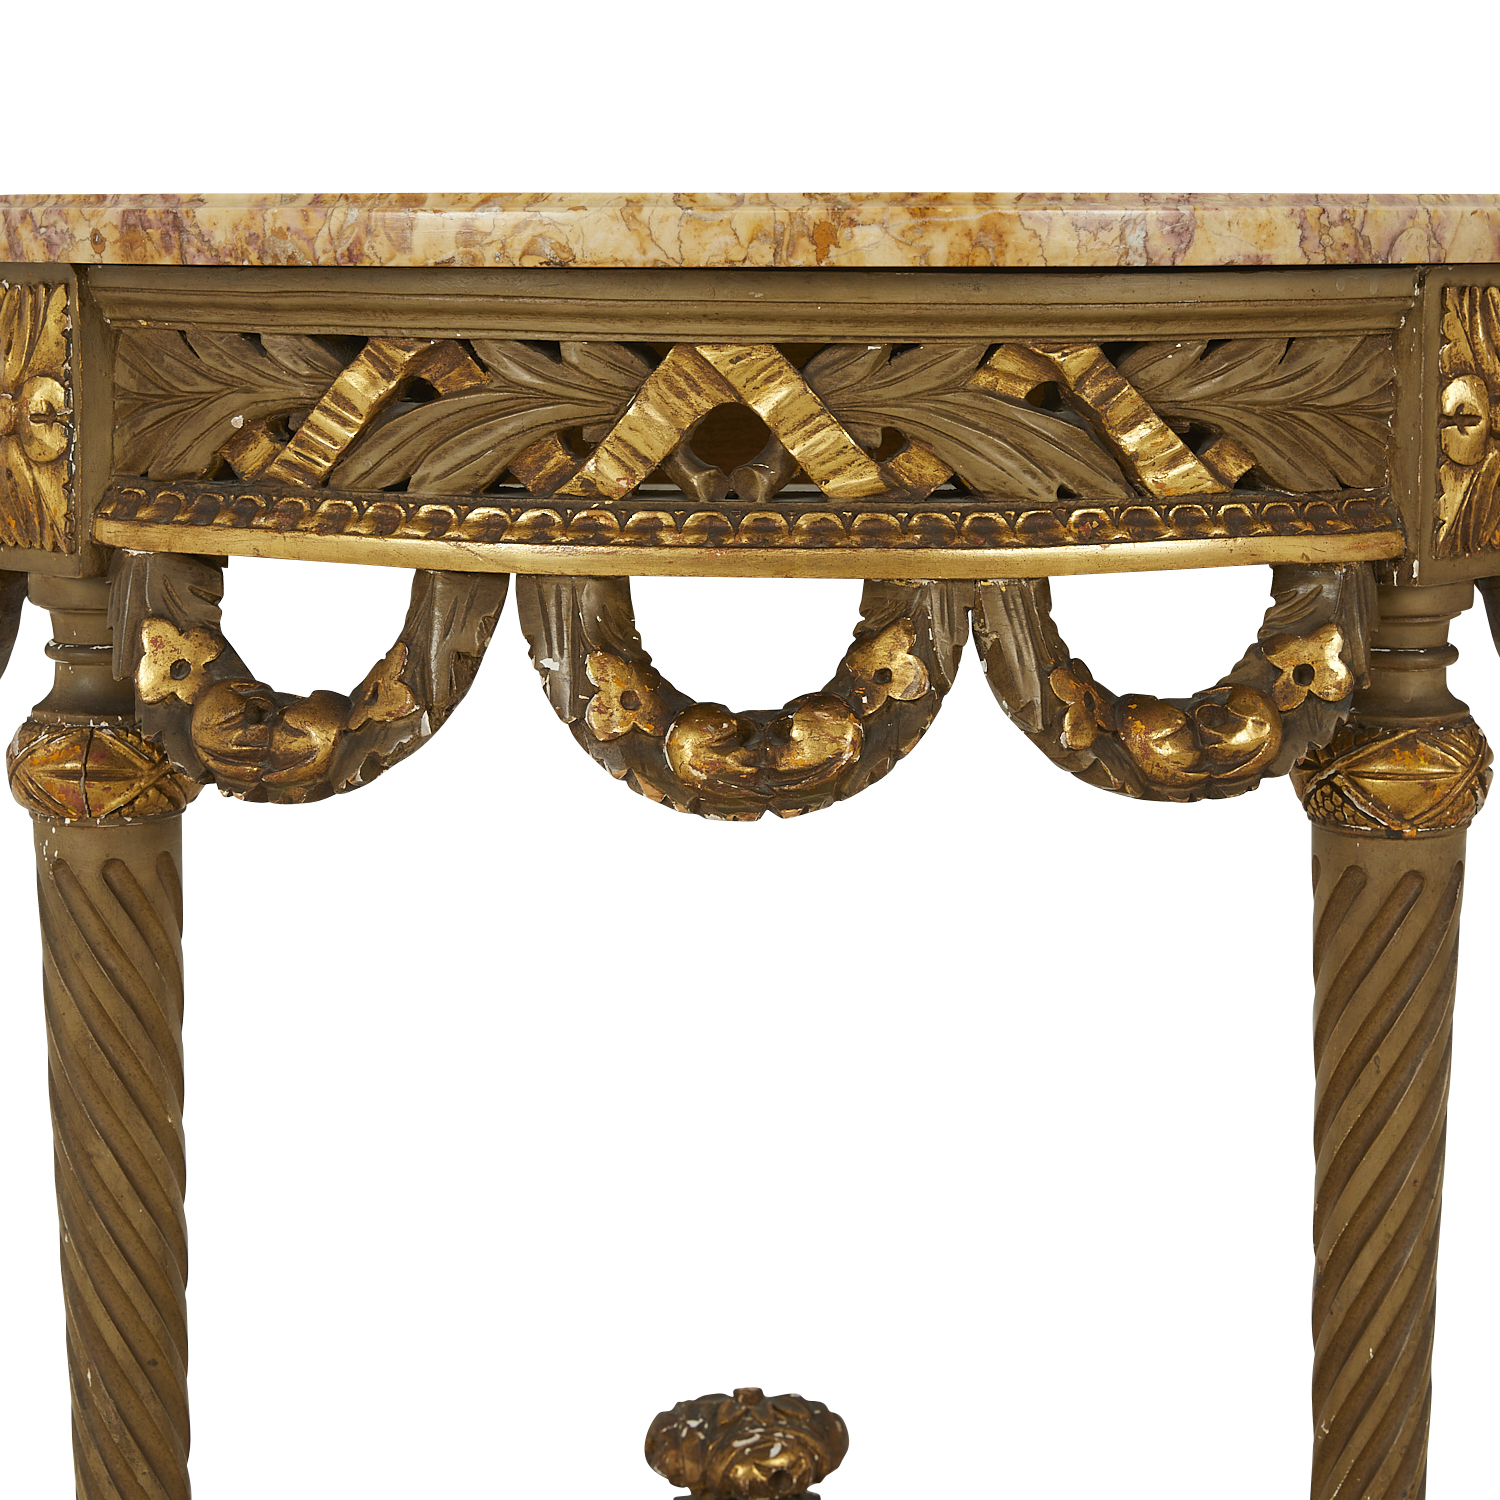 Pr French Louis XVI Style Demilune Hall Tables - Image 21 of 22